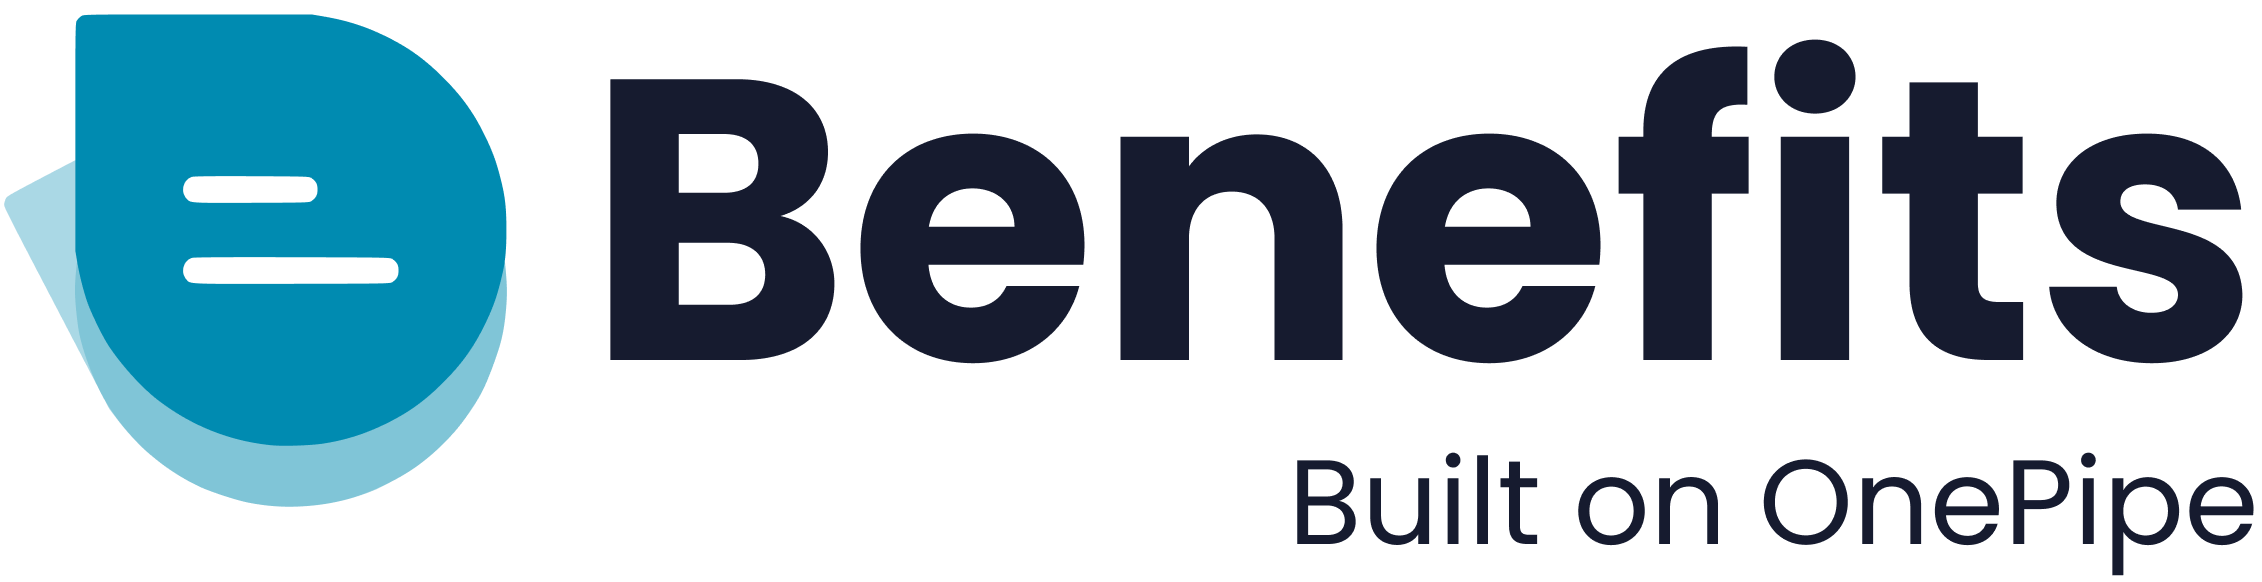 OnePipe – Launch or embed financial services in days, not years